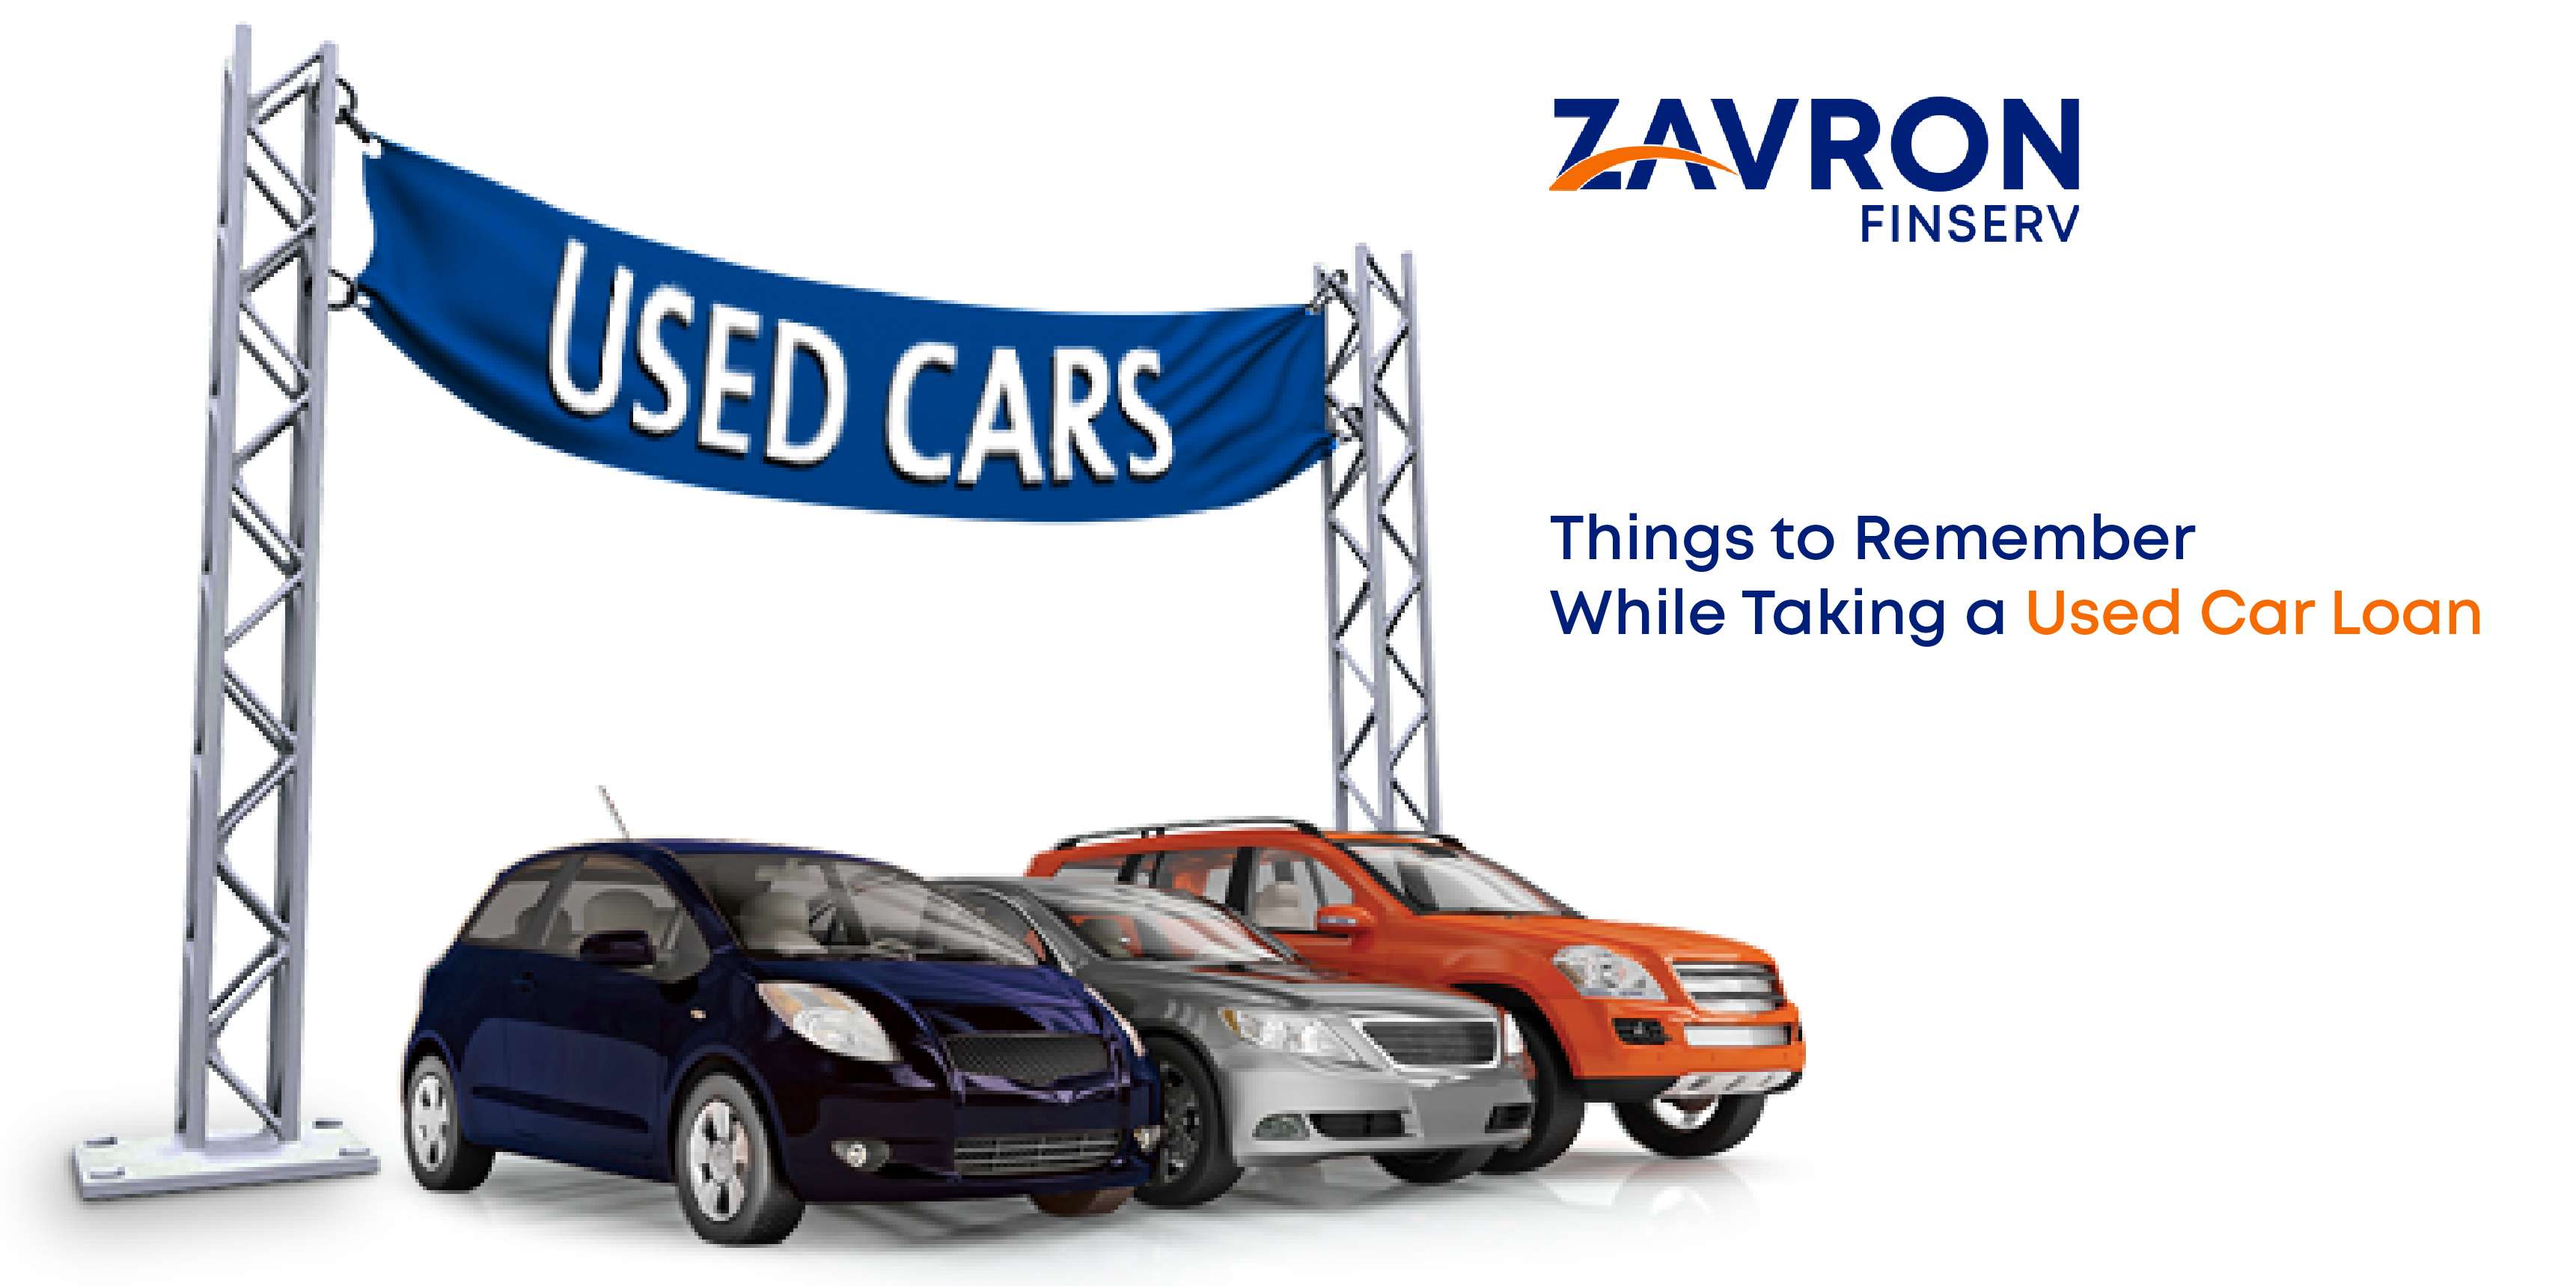 11 Things to Remember While Taking a Used Car Loan